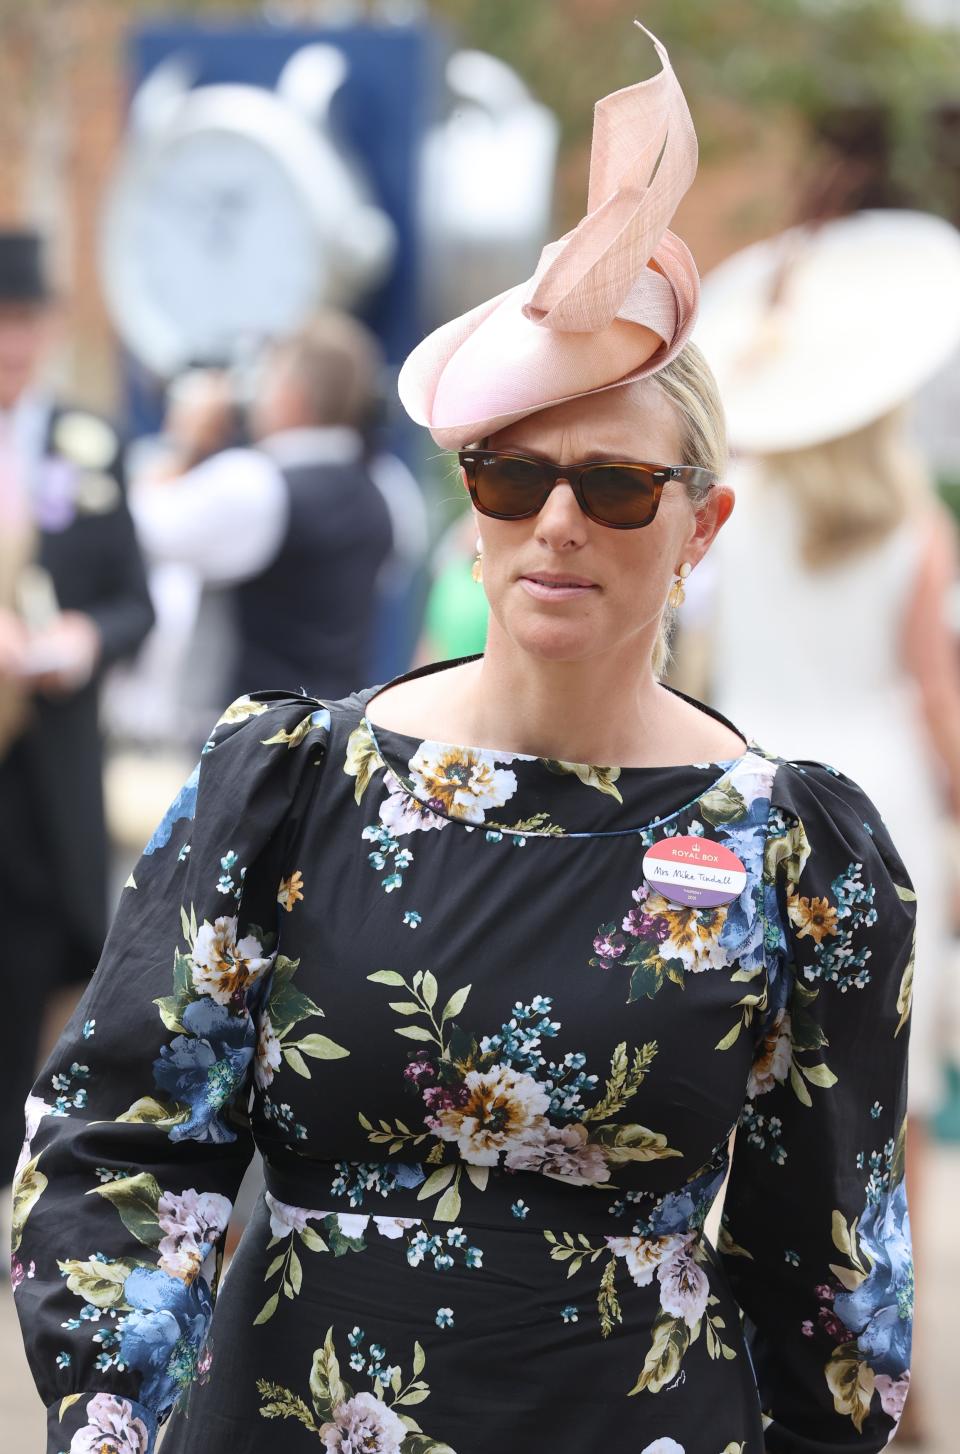 Zara Tindall (Getty Images)